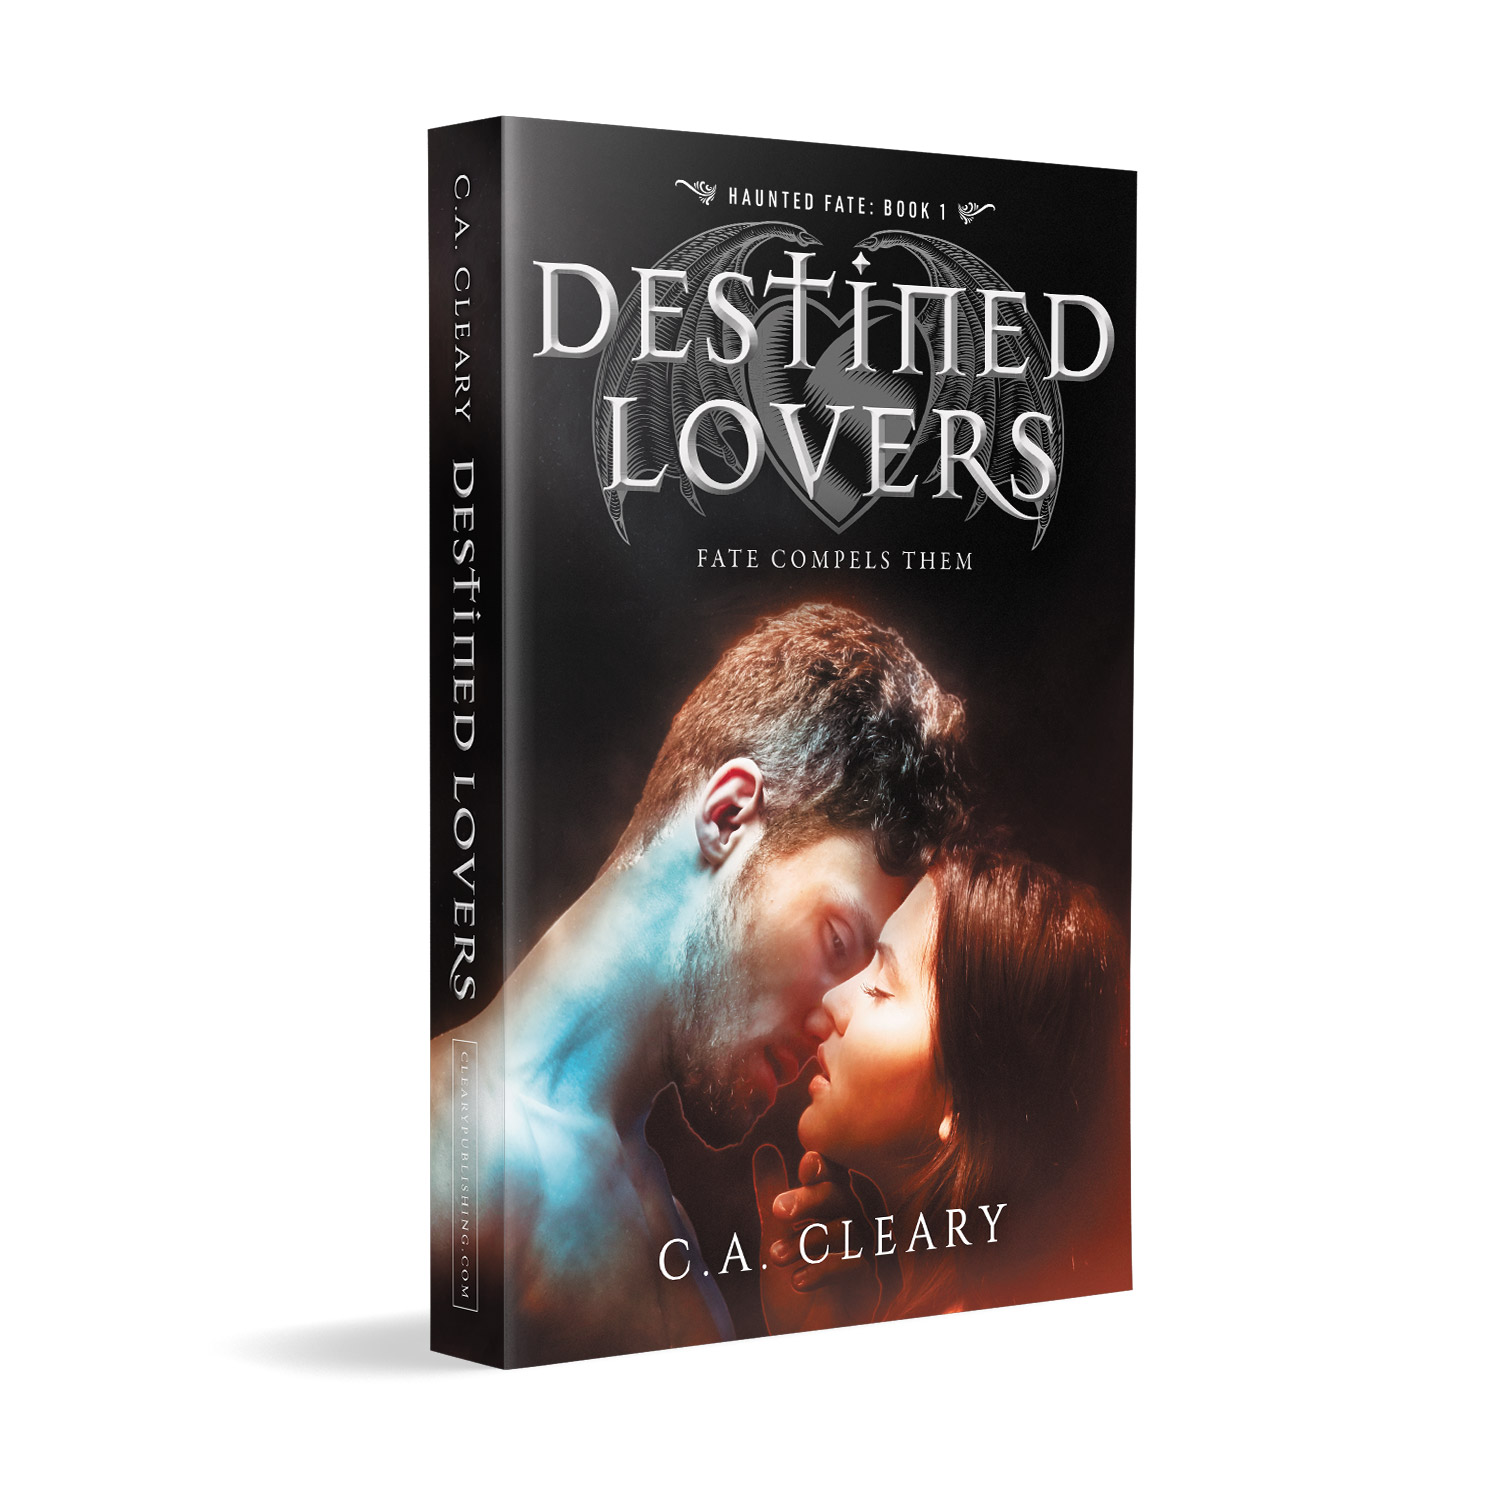 'Destined Lovers (Haunted Fate" Book 1)' is the first bite of a vampire series, by C.A. Cleary. The book cover and interior were designed by Mark Thomas of coverness.com. To find out more about my book design services, please visit www.coverness.com